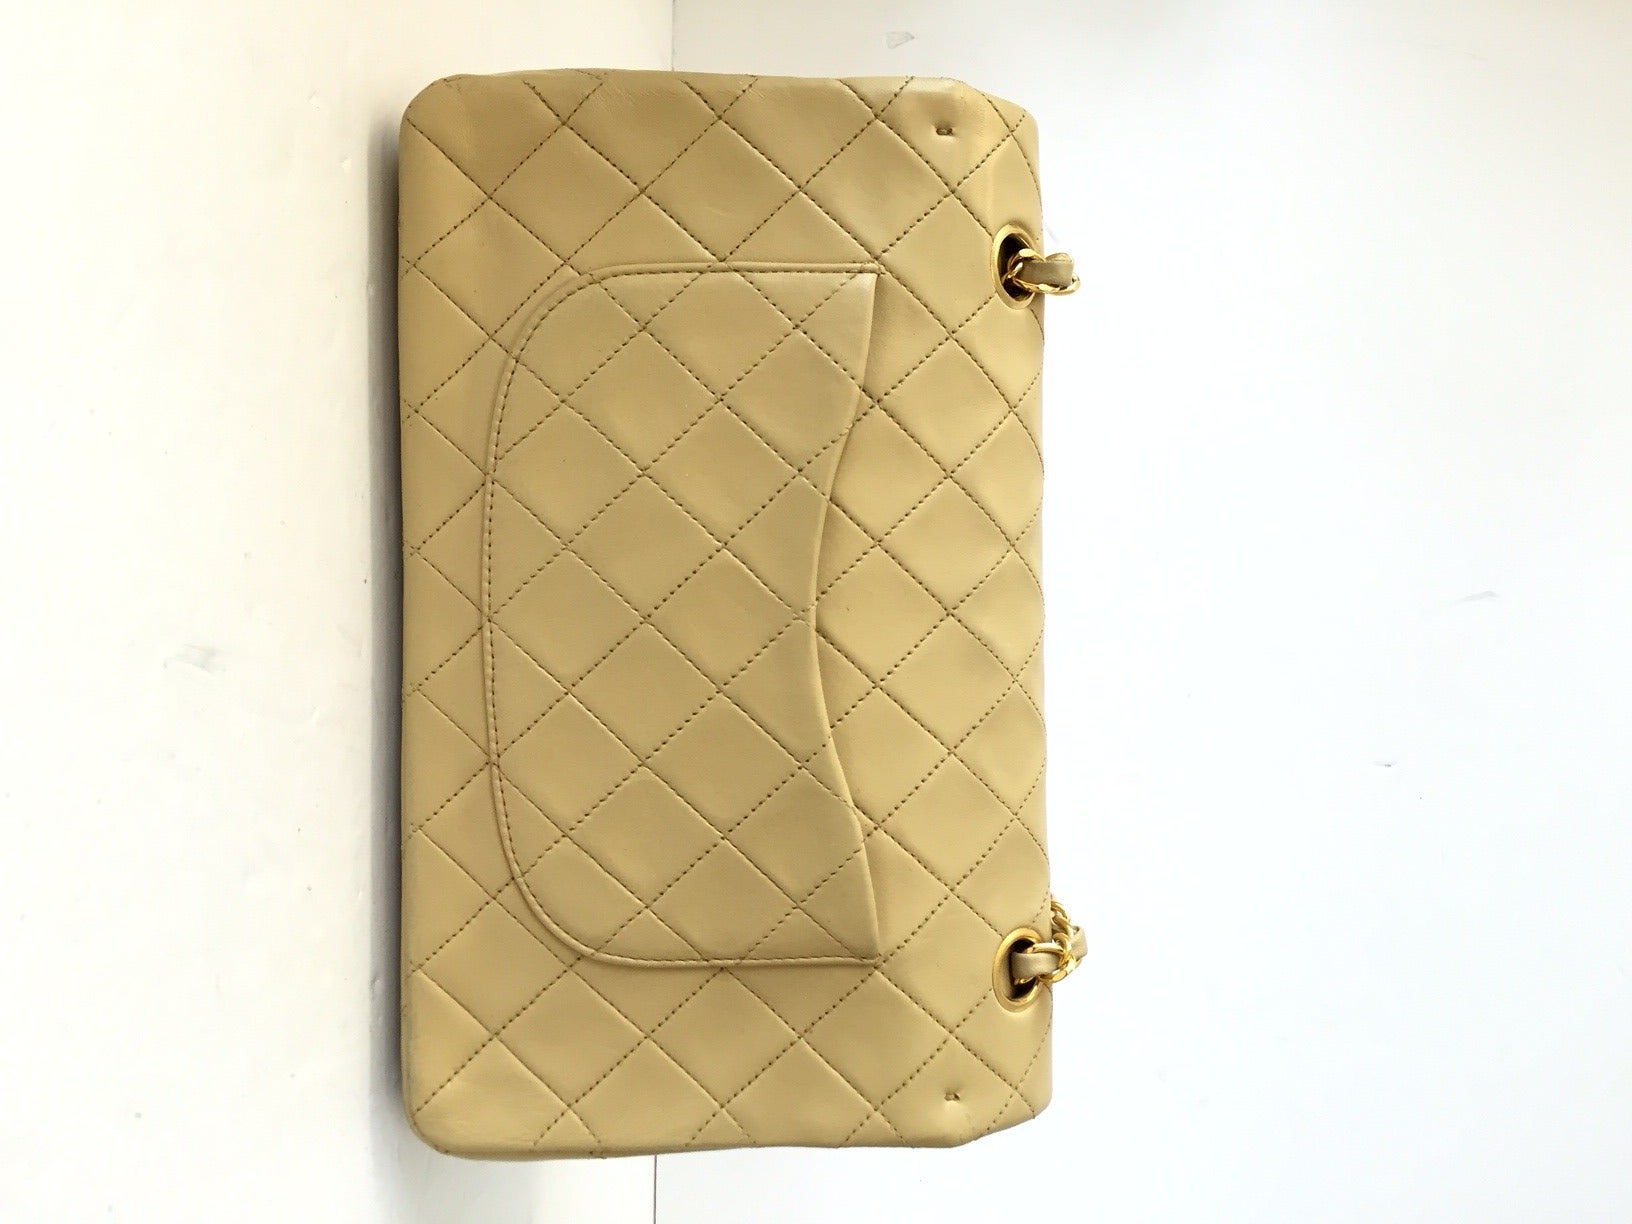 Chanel Beige Medium 2.55 Double Flap Bag In Excellent Condition For Sale In Westmount, Quebec